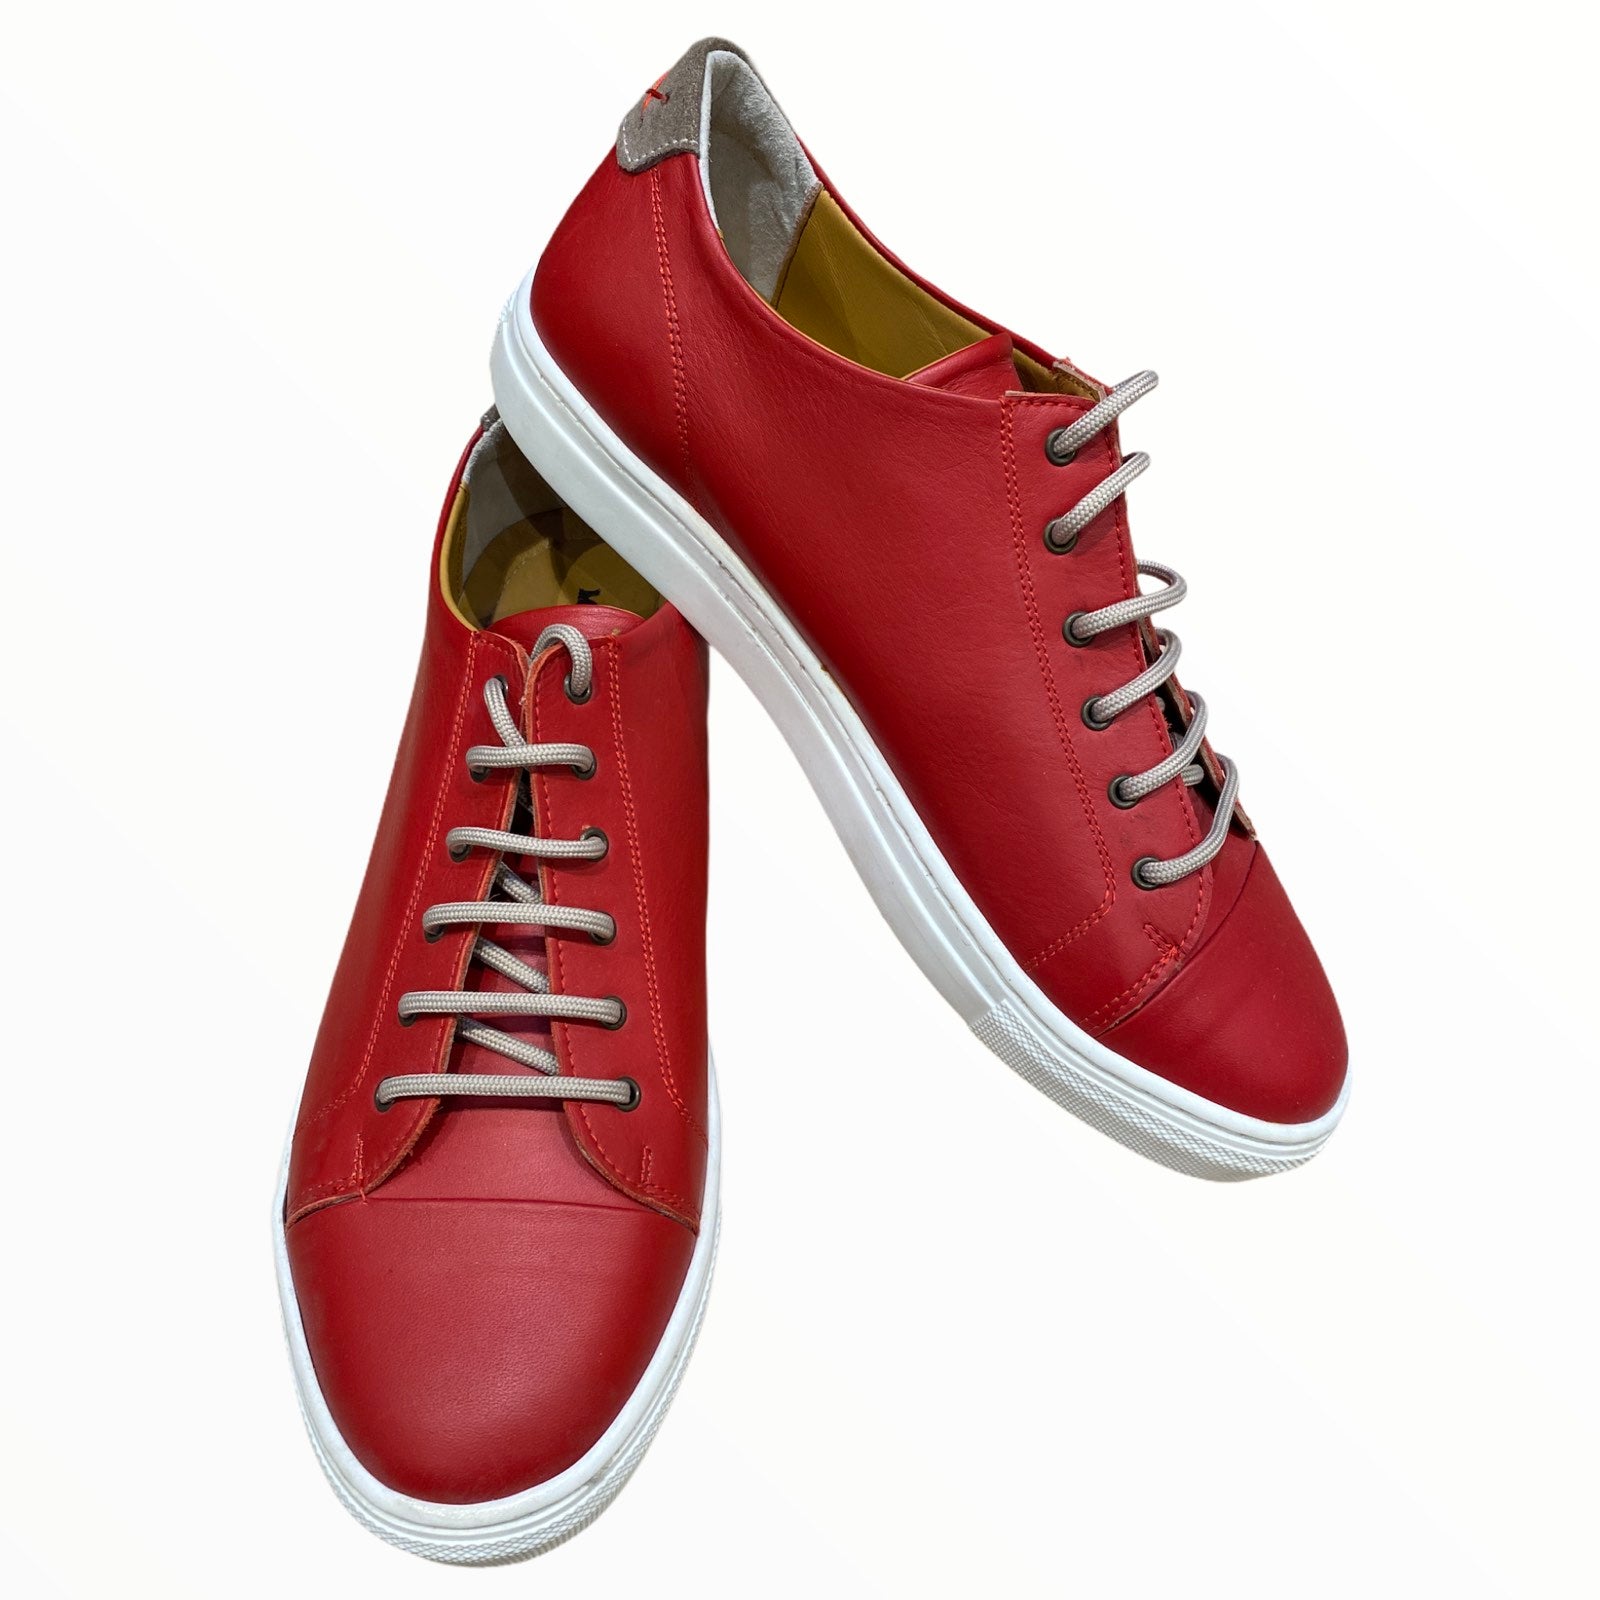 Red lifestyle anatomic leather sneakers